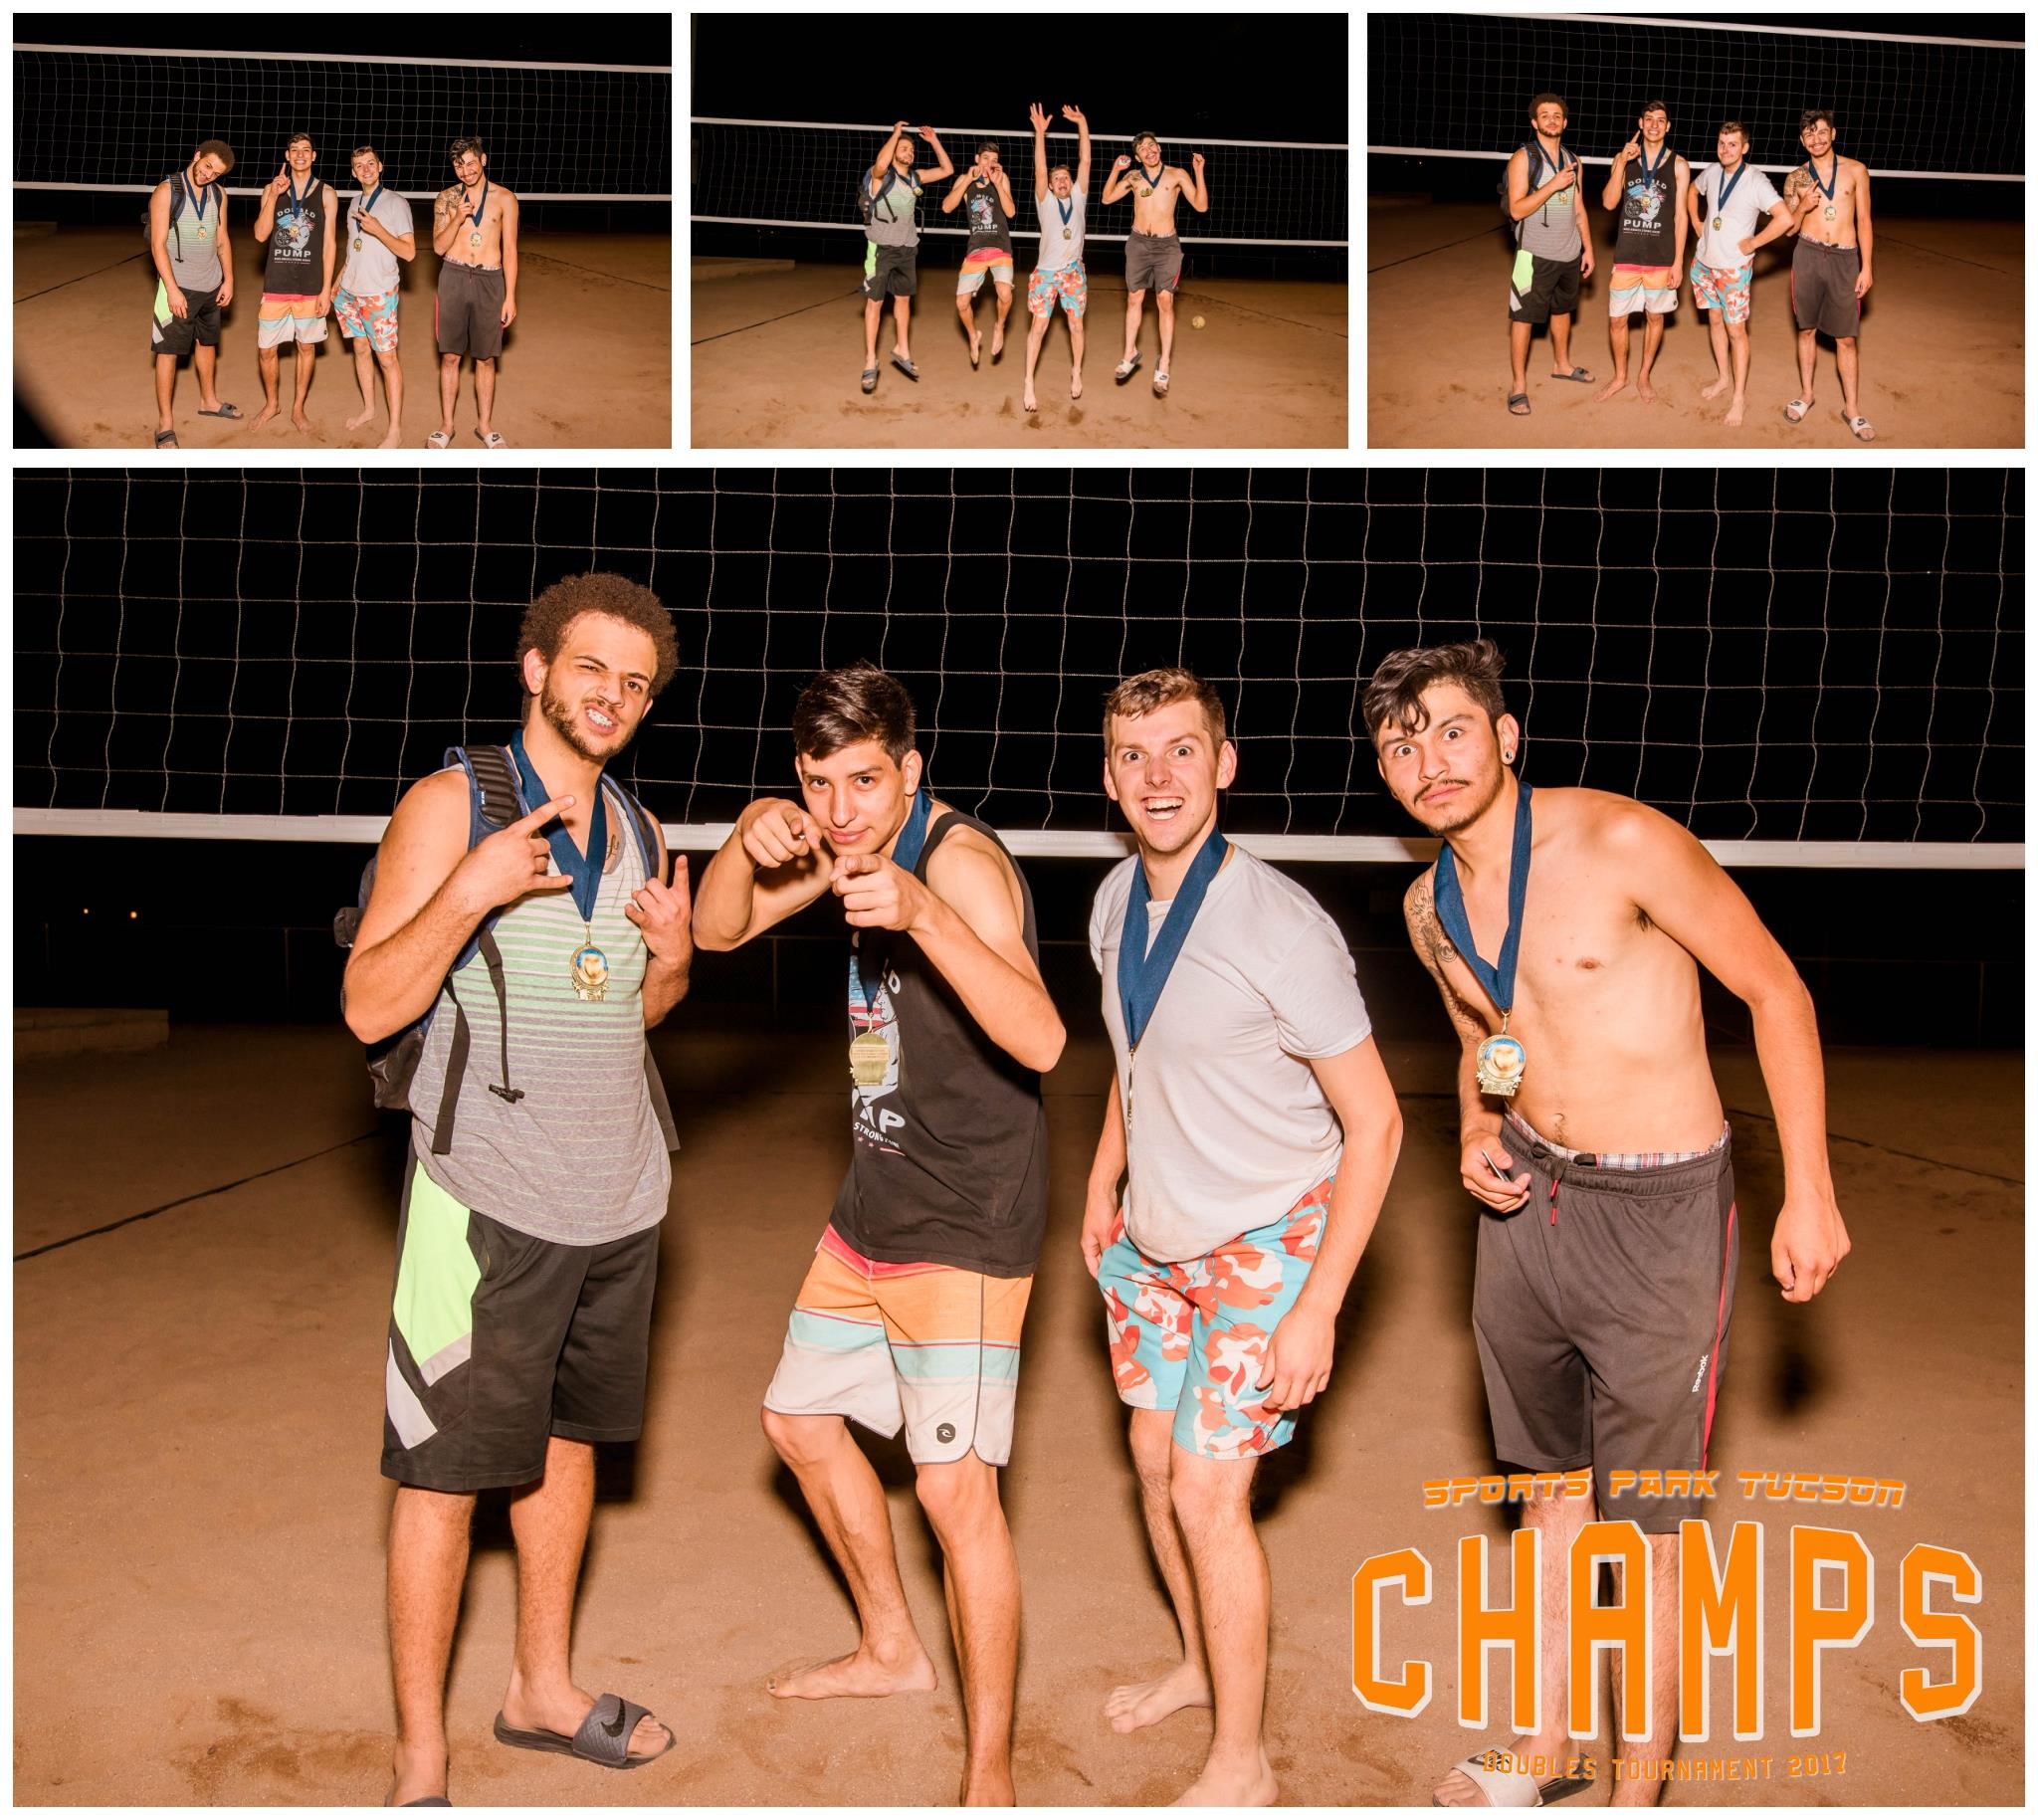 August 19th Volleyball Tournament (Men's) - 7PM Champions